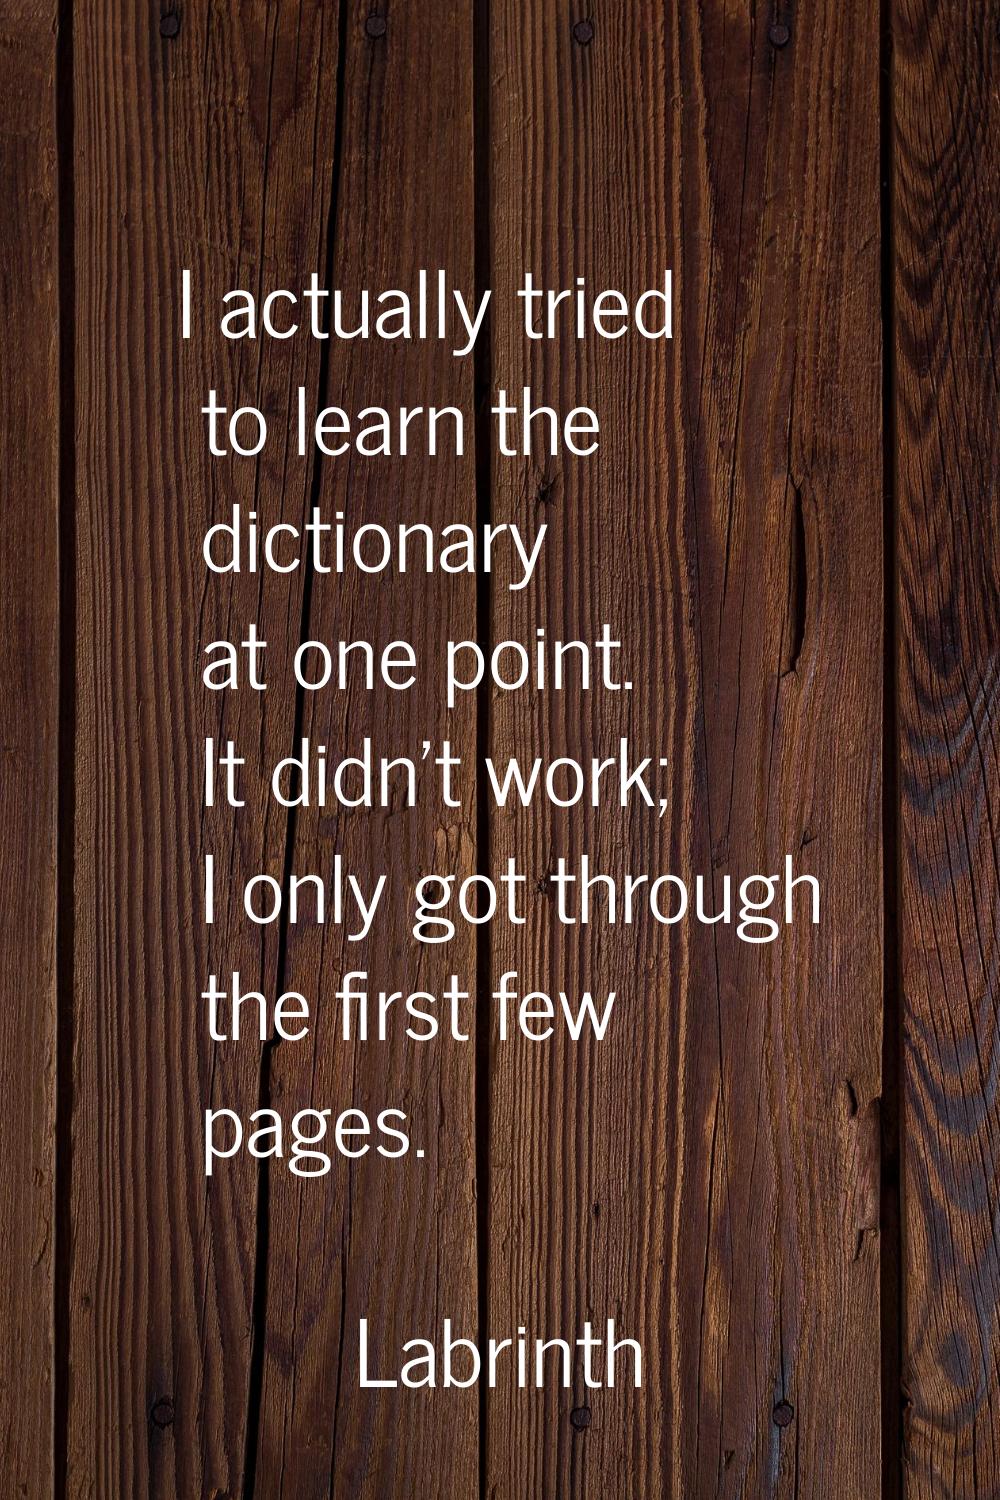 I actually tried to learn the dictionary at one point. It didn't work; I only got through the first